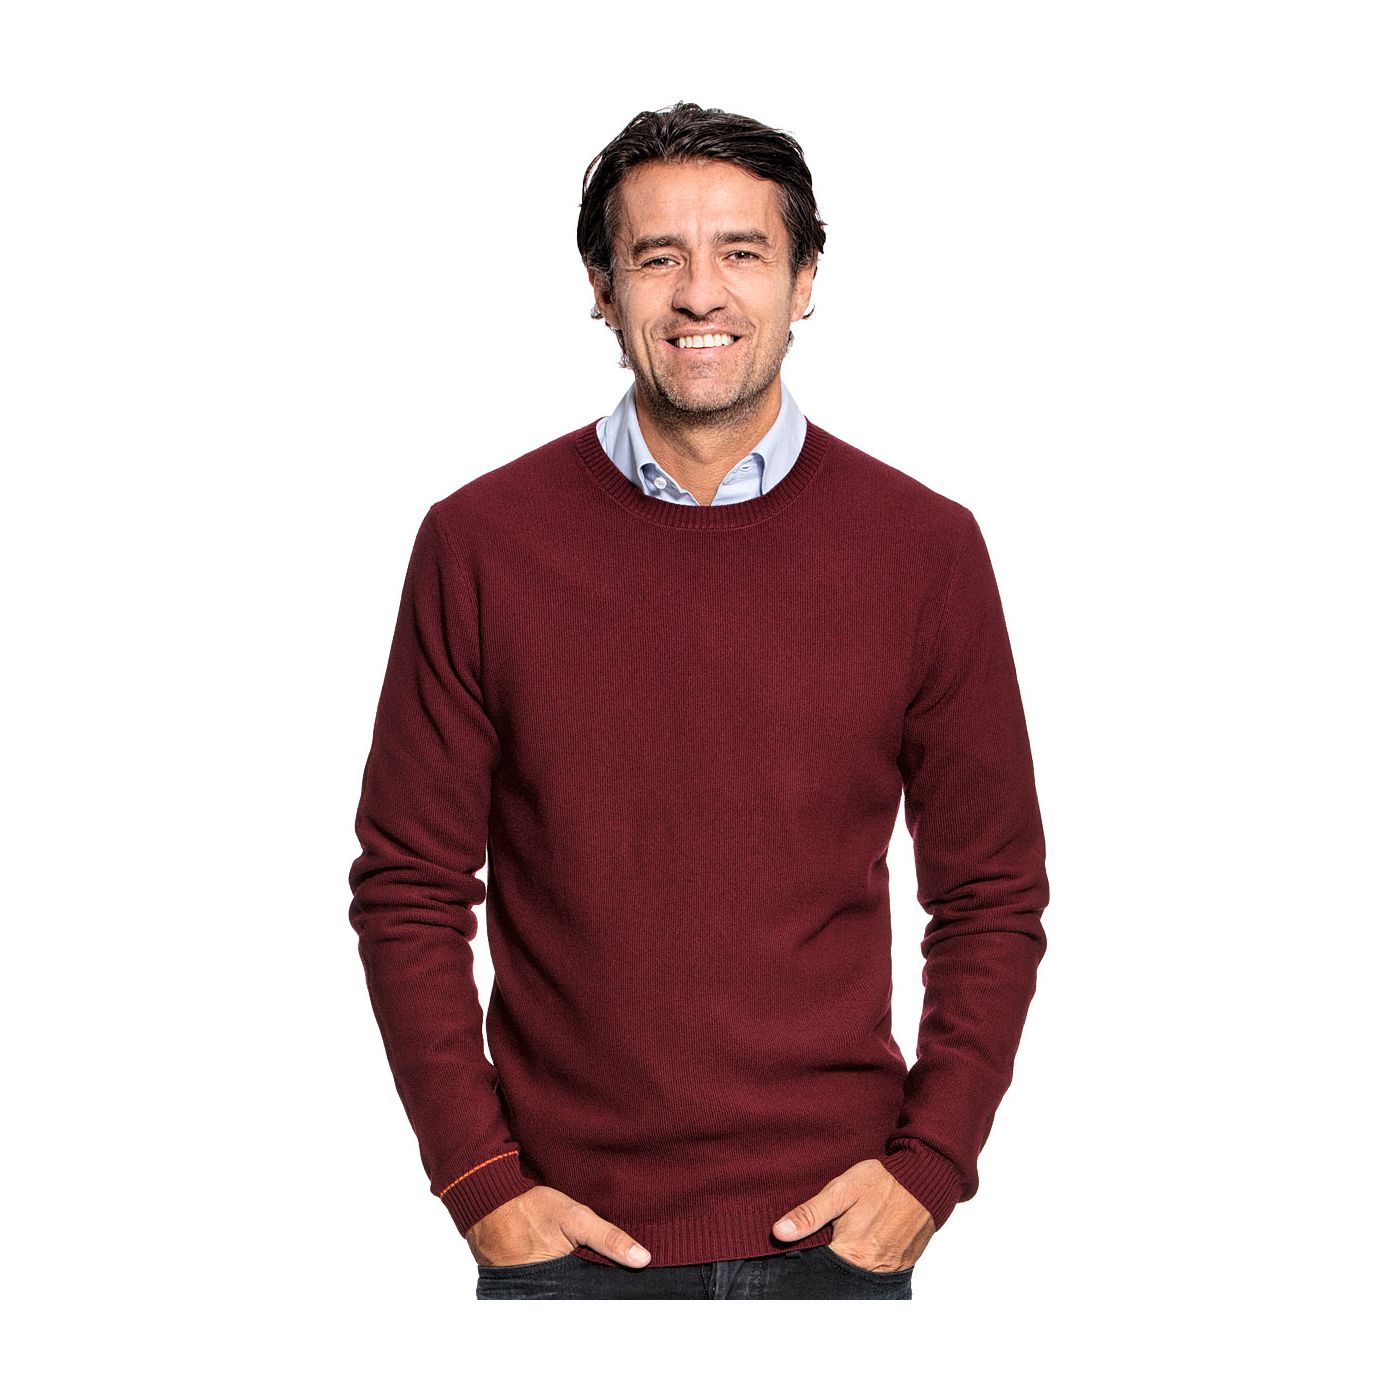 Honeycomb knit sweater for men made of Merino wool in Red